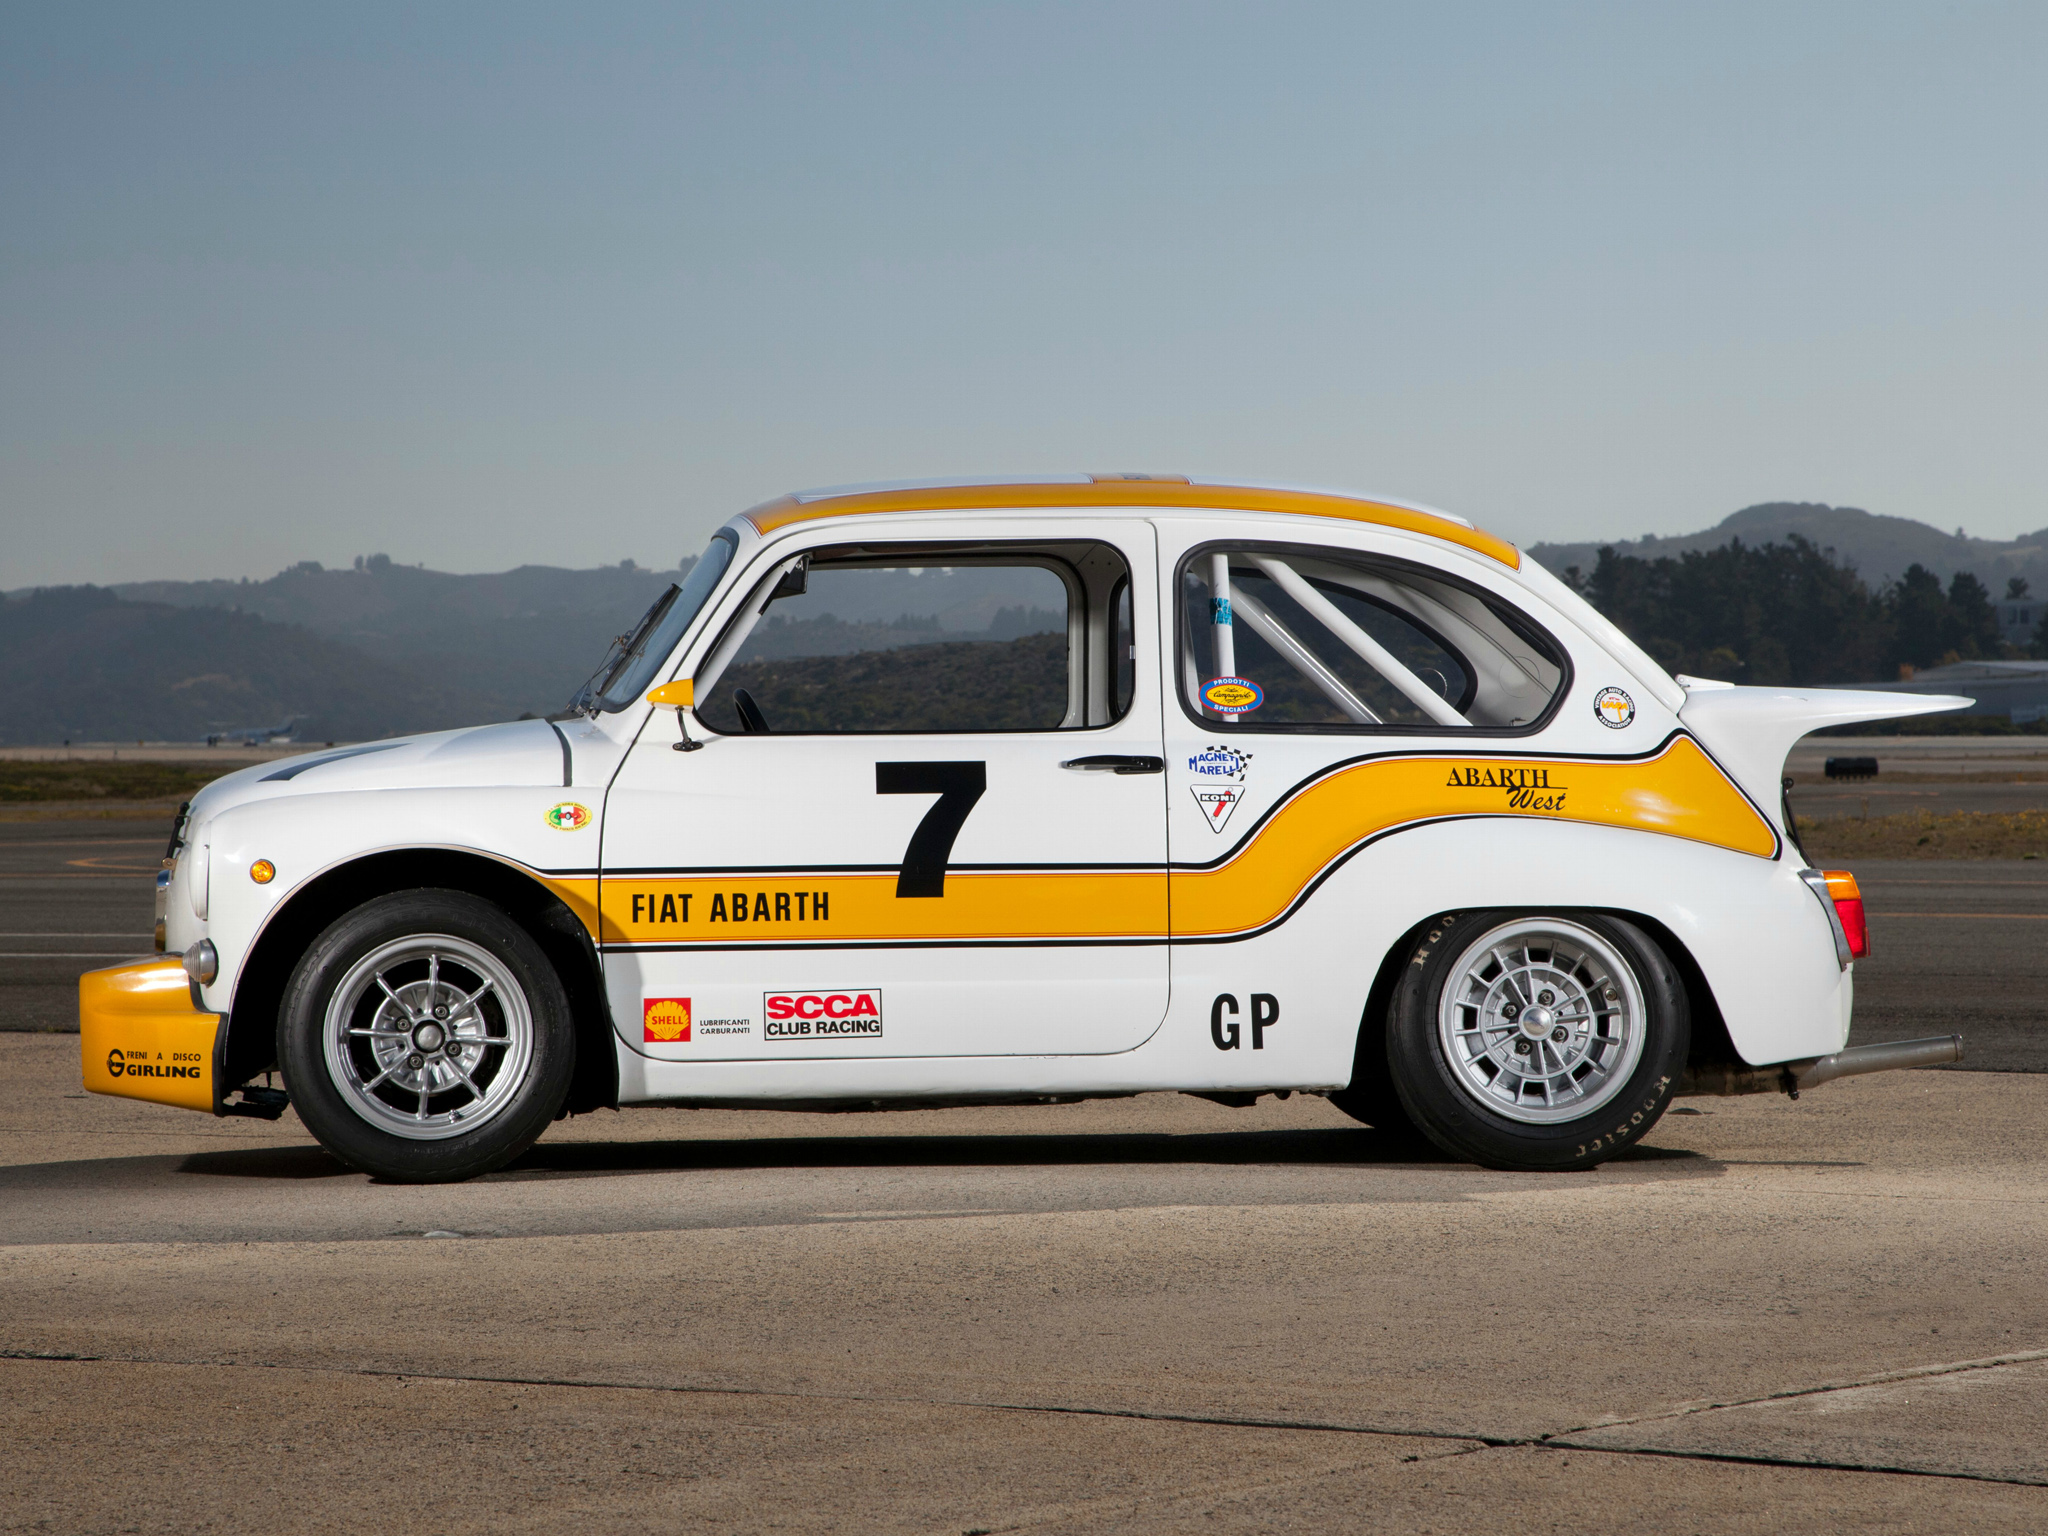 1970, Abarth, Fiat, 1000, Tcr, Group 2, Race, Racing Wallpaper